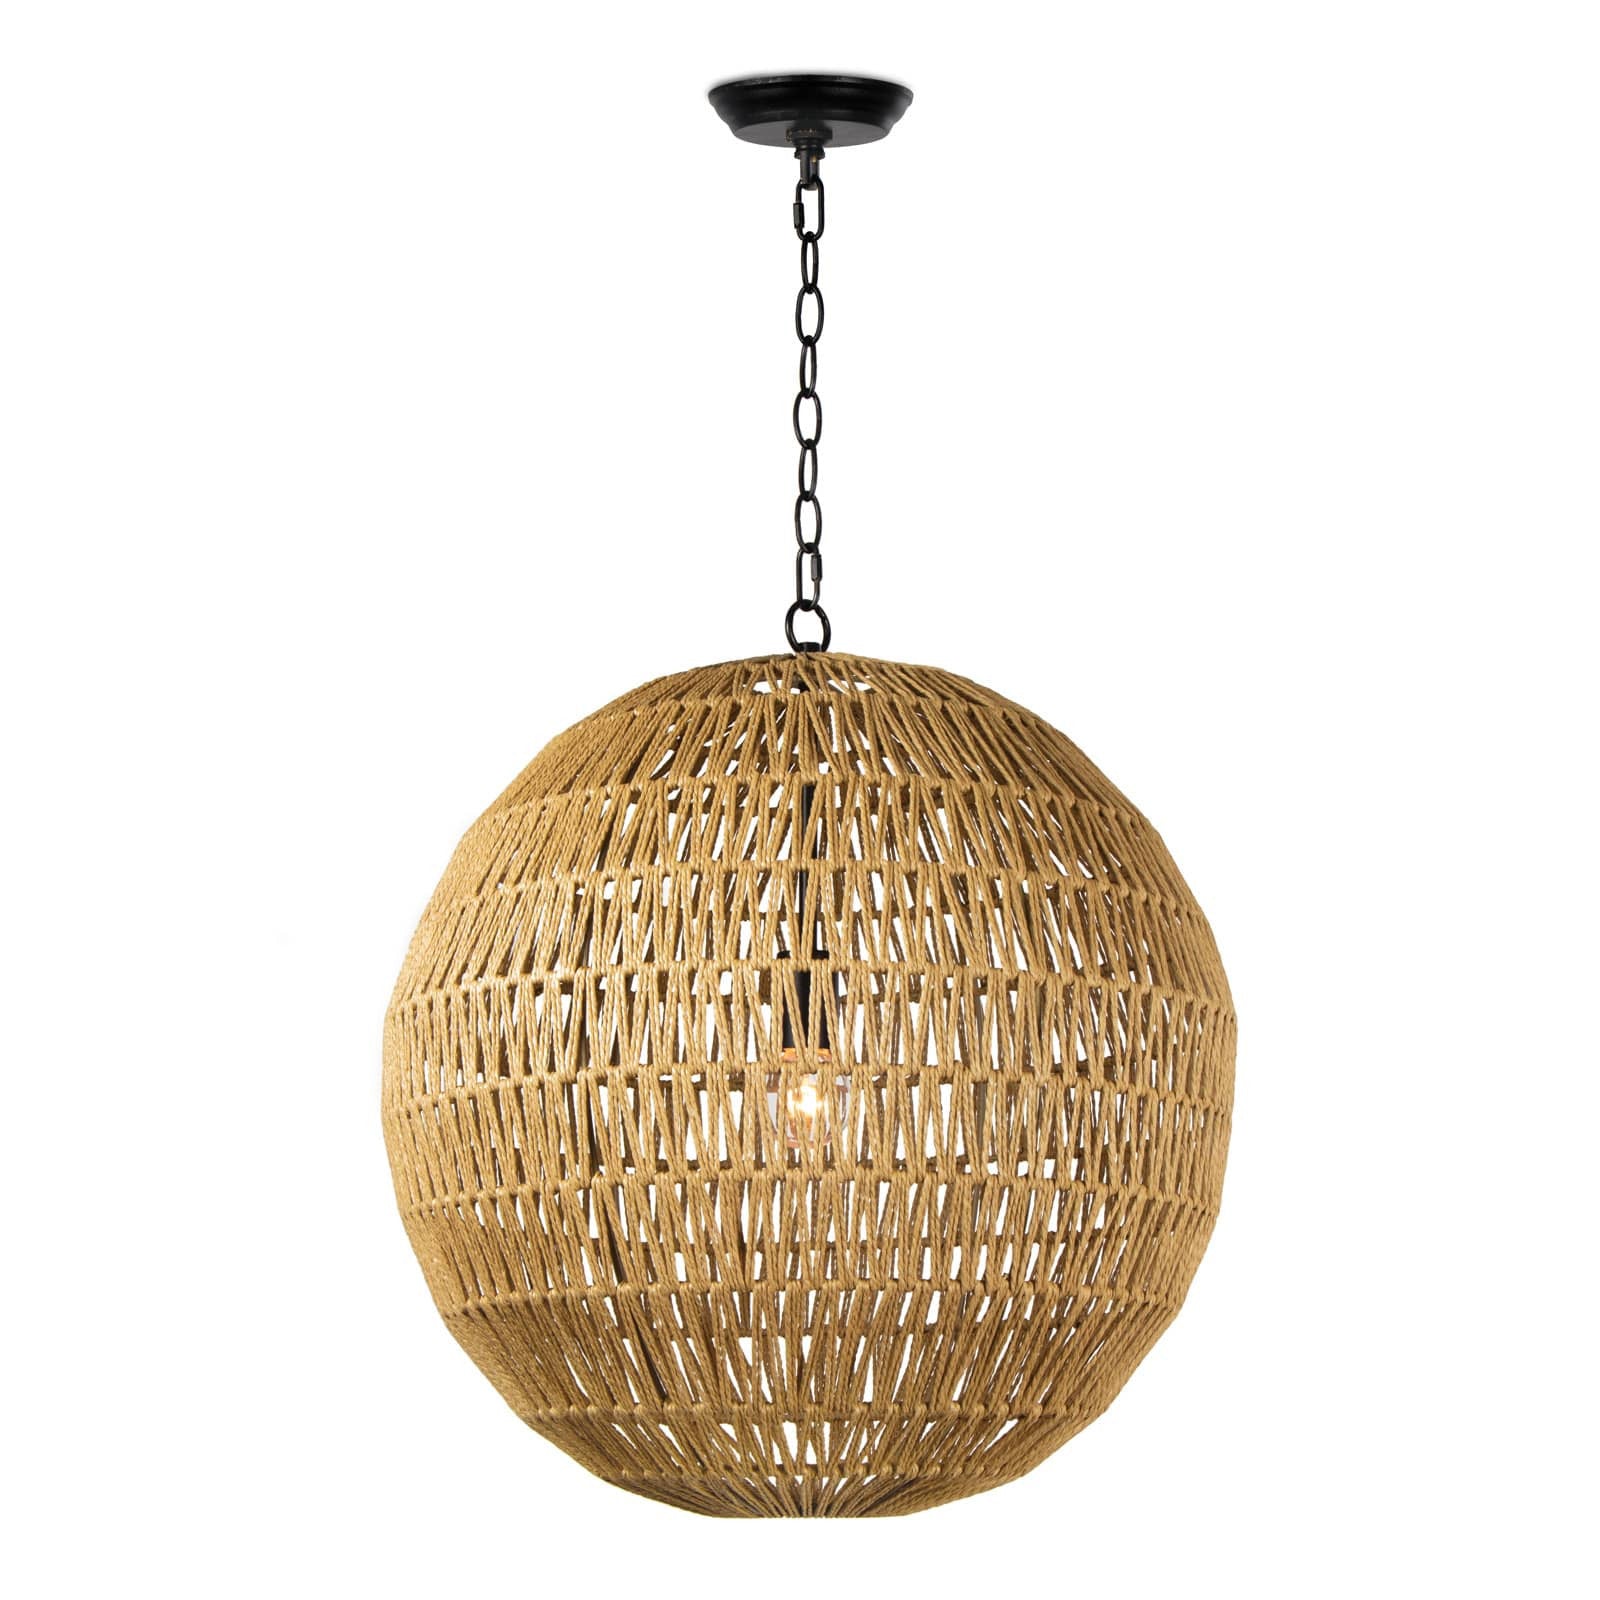 With a relaxed, Cali-cool vibe, the Seaside Pendant Small adds natural texture to any interior design. Thin jute is wrapped atop a natural-toned, metal globe in a pattern intended to let light shine through and out.    Overall Dimensions: 20"w x 20"d x 24"h